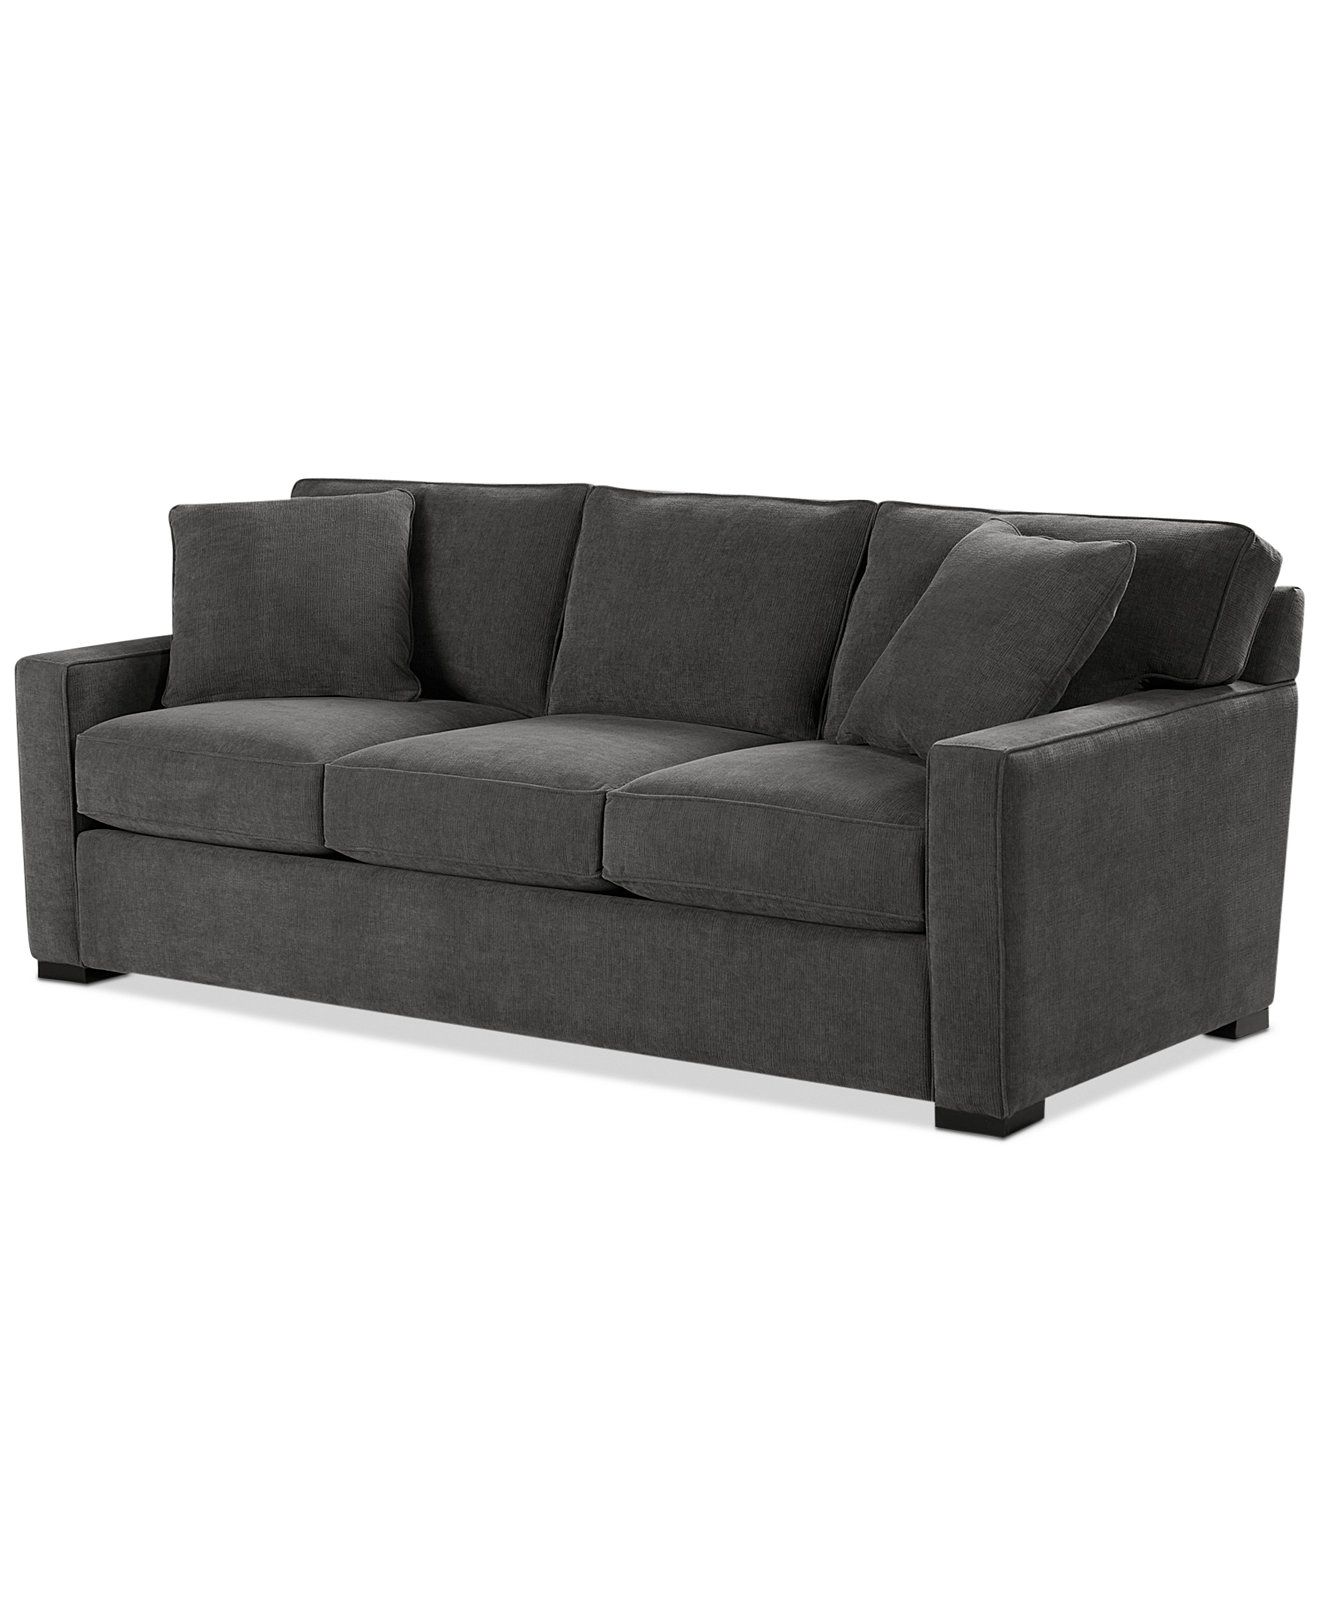 Macys Sofas For Fashionable Best Macys Sleeper Sofa Beautiful Furniture Home Design Ideas With (View 15 of 20)